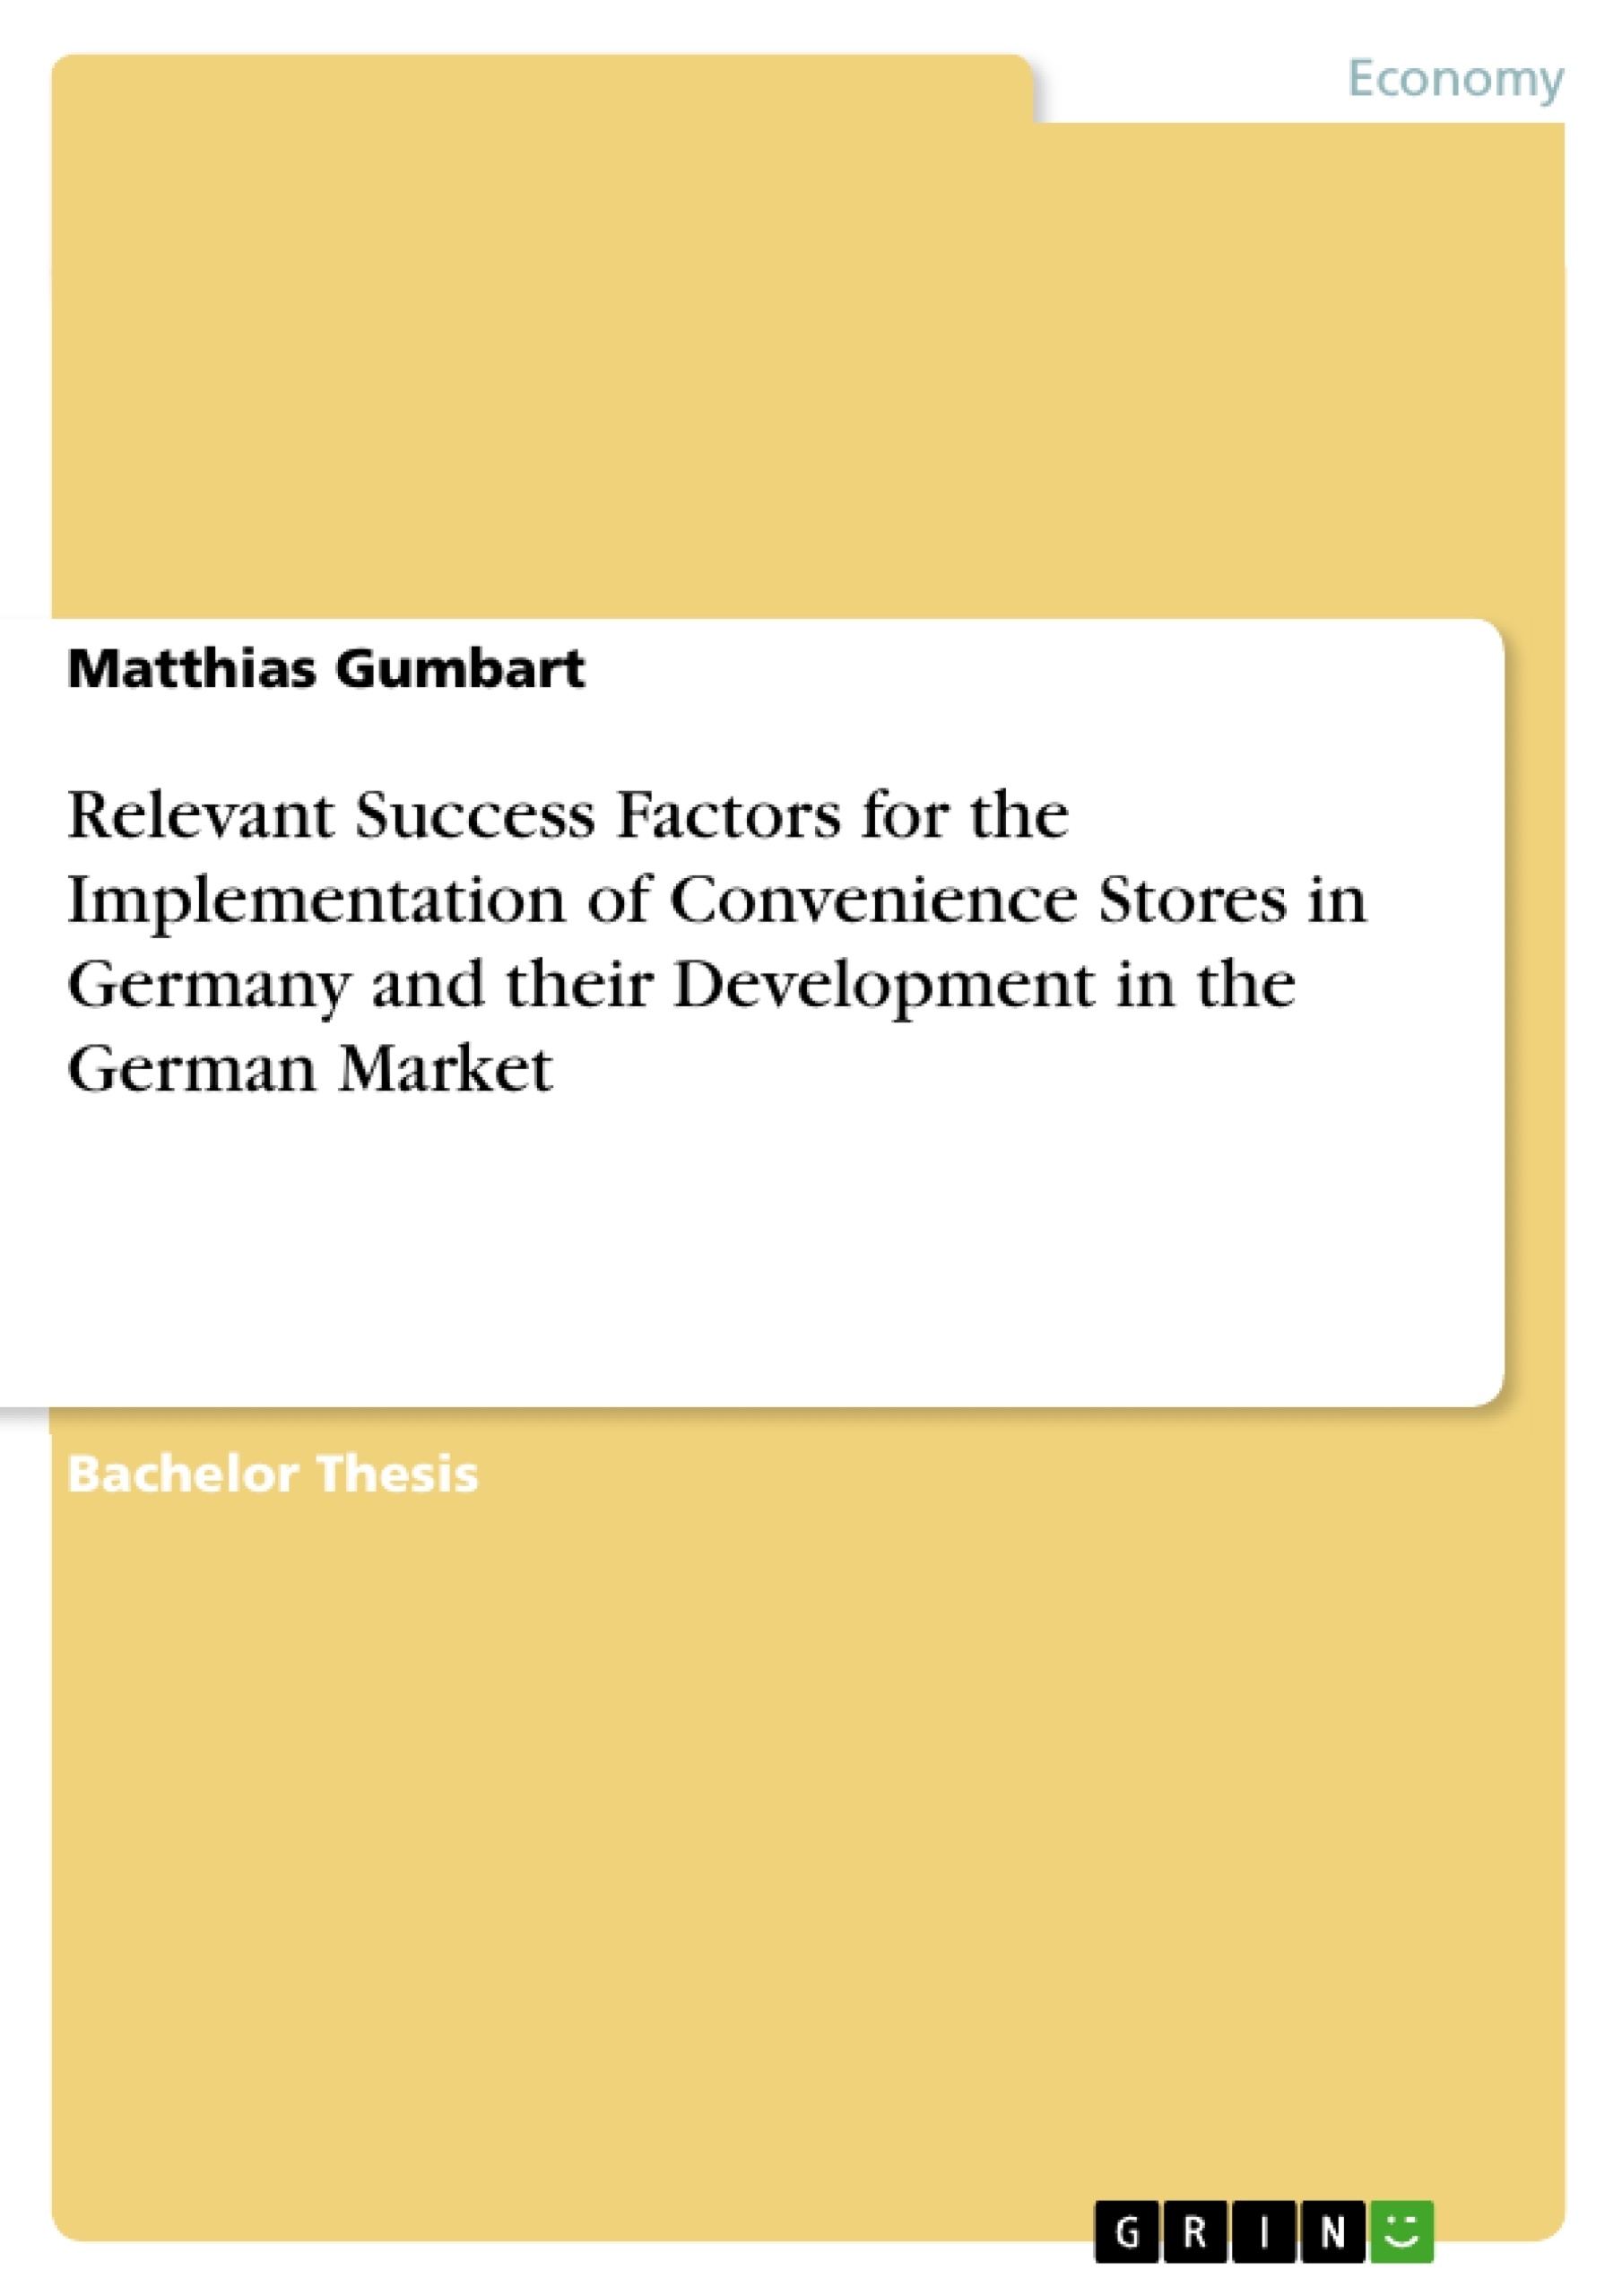 Title: Relevant Success Factors for the Implementation of Convenience Stores in Germany and their Development in the German Market